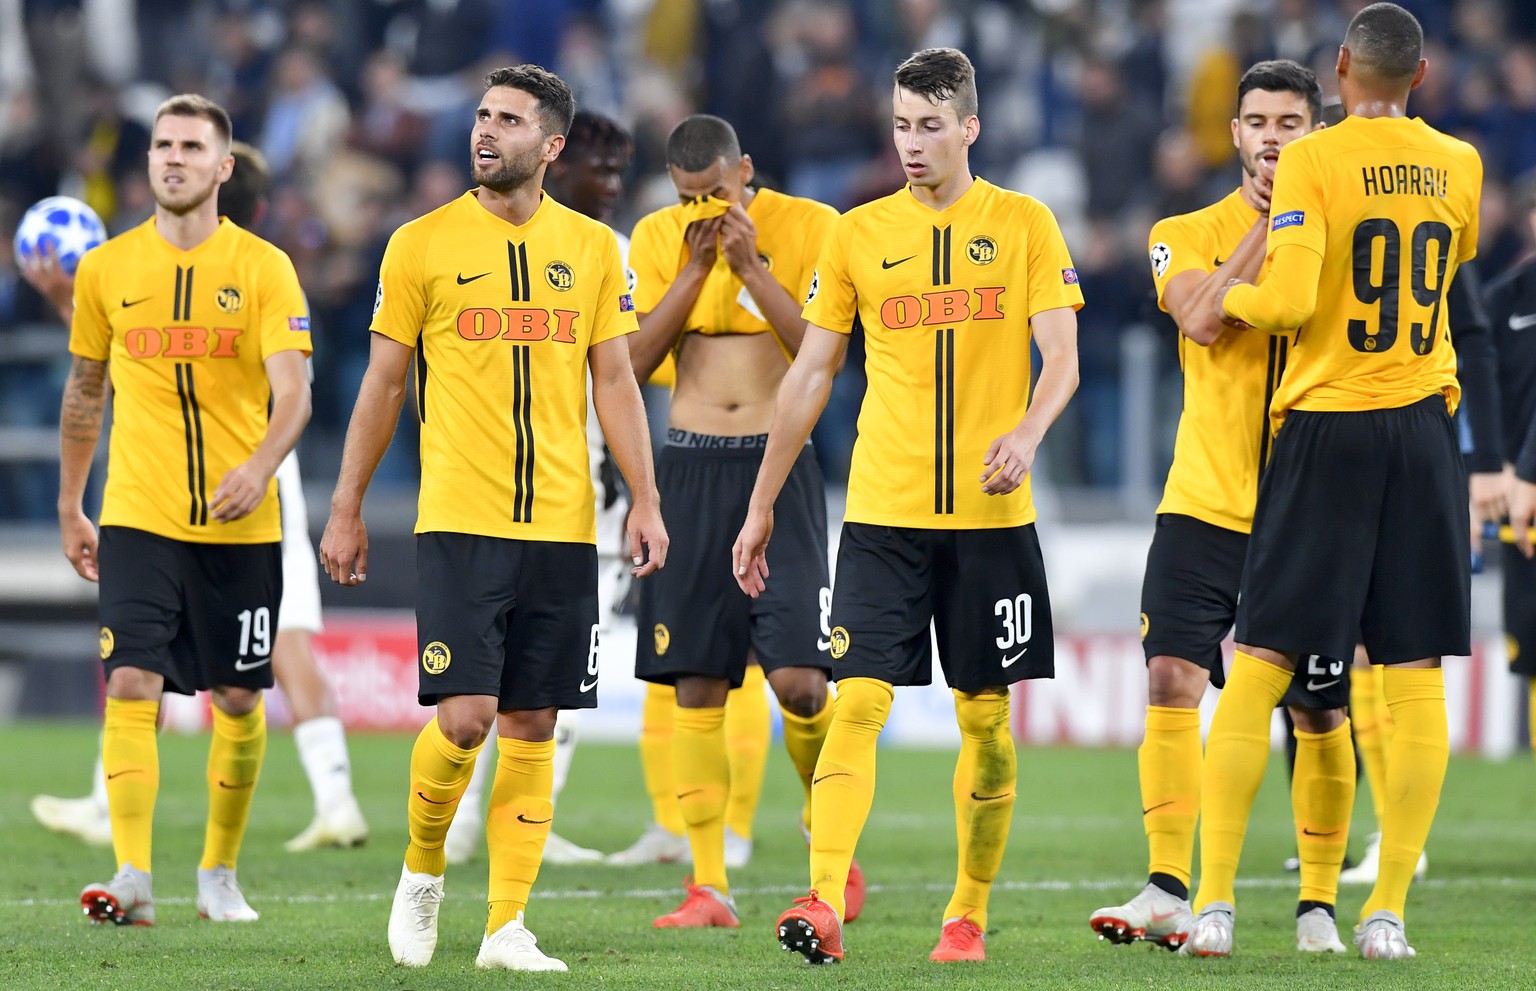 YB&#039;s soccer players, from left, Thorsten Schick, Leonardo Bertone, Djibril Sow, Sandro Lauper, Loris Benito and Guillaume Hoarau look desapointed after loosing the UEFA Champions League group sta ...